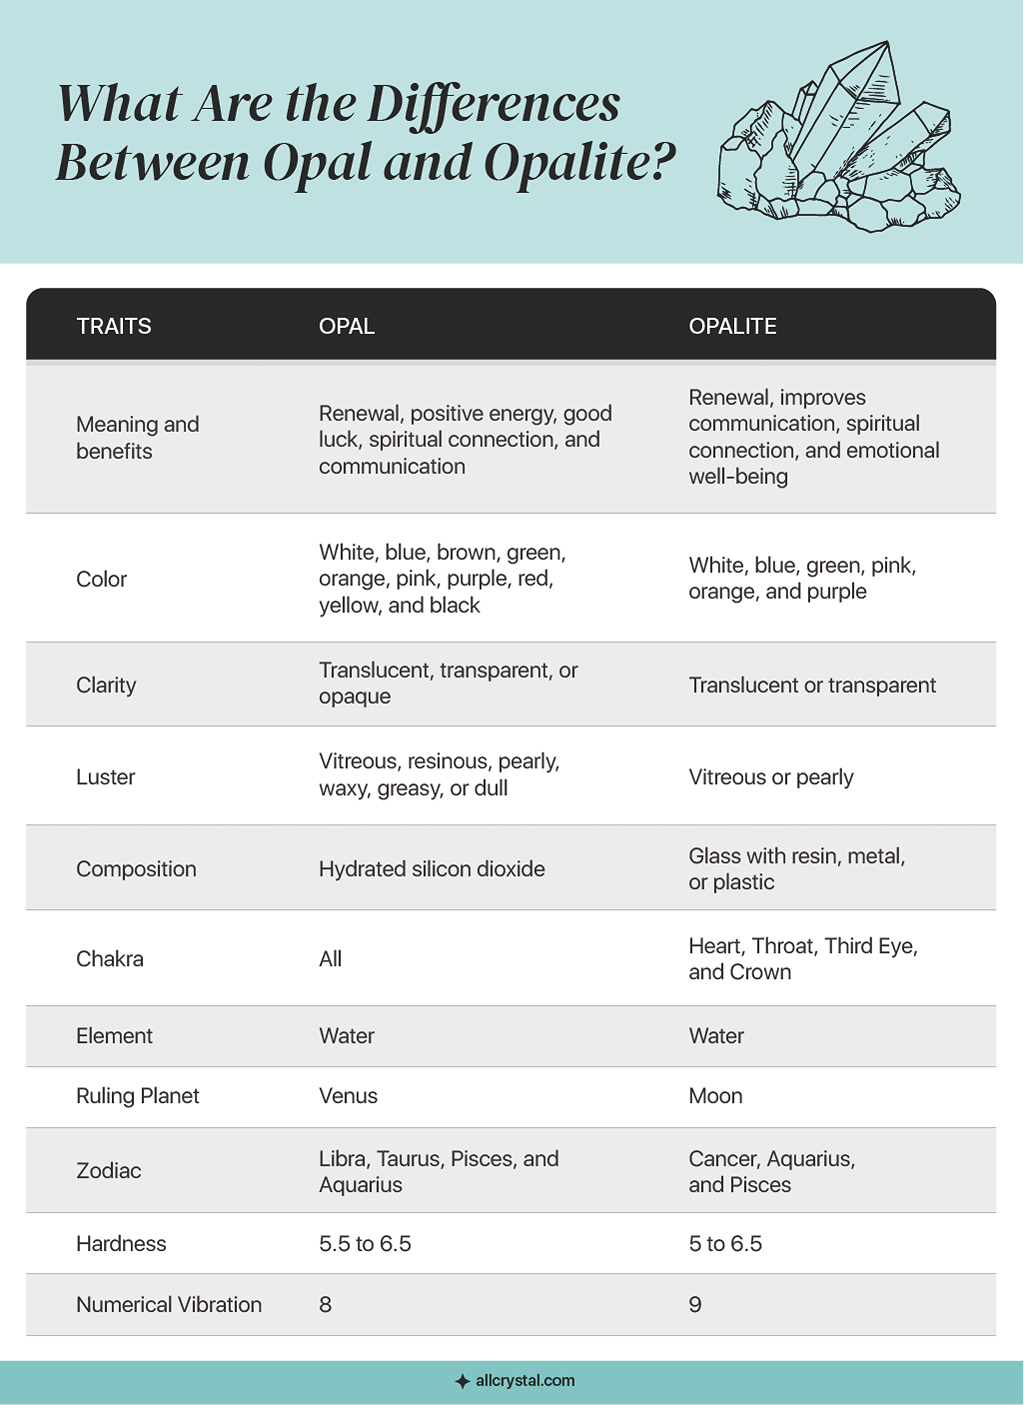 A custom graphic table for the Differences between Opal and Opalite